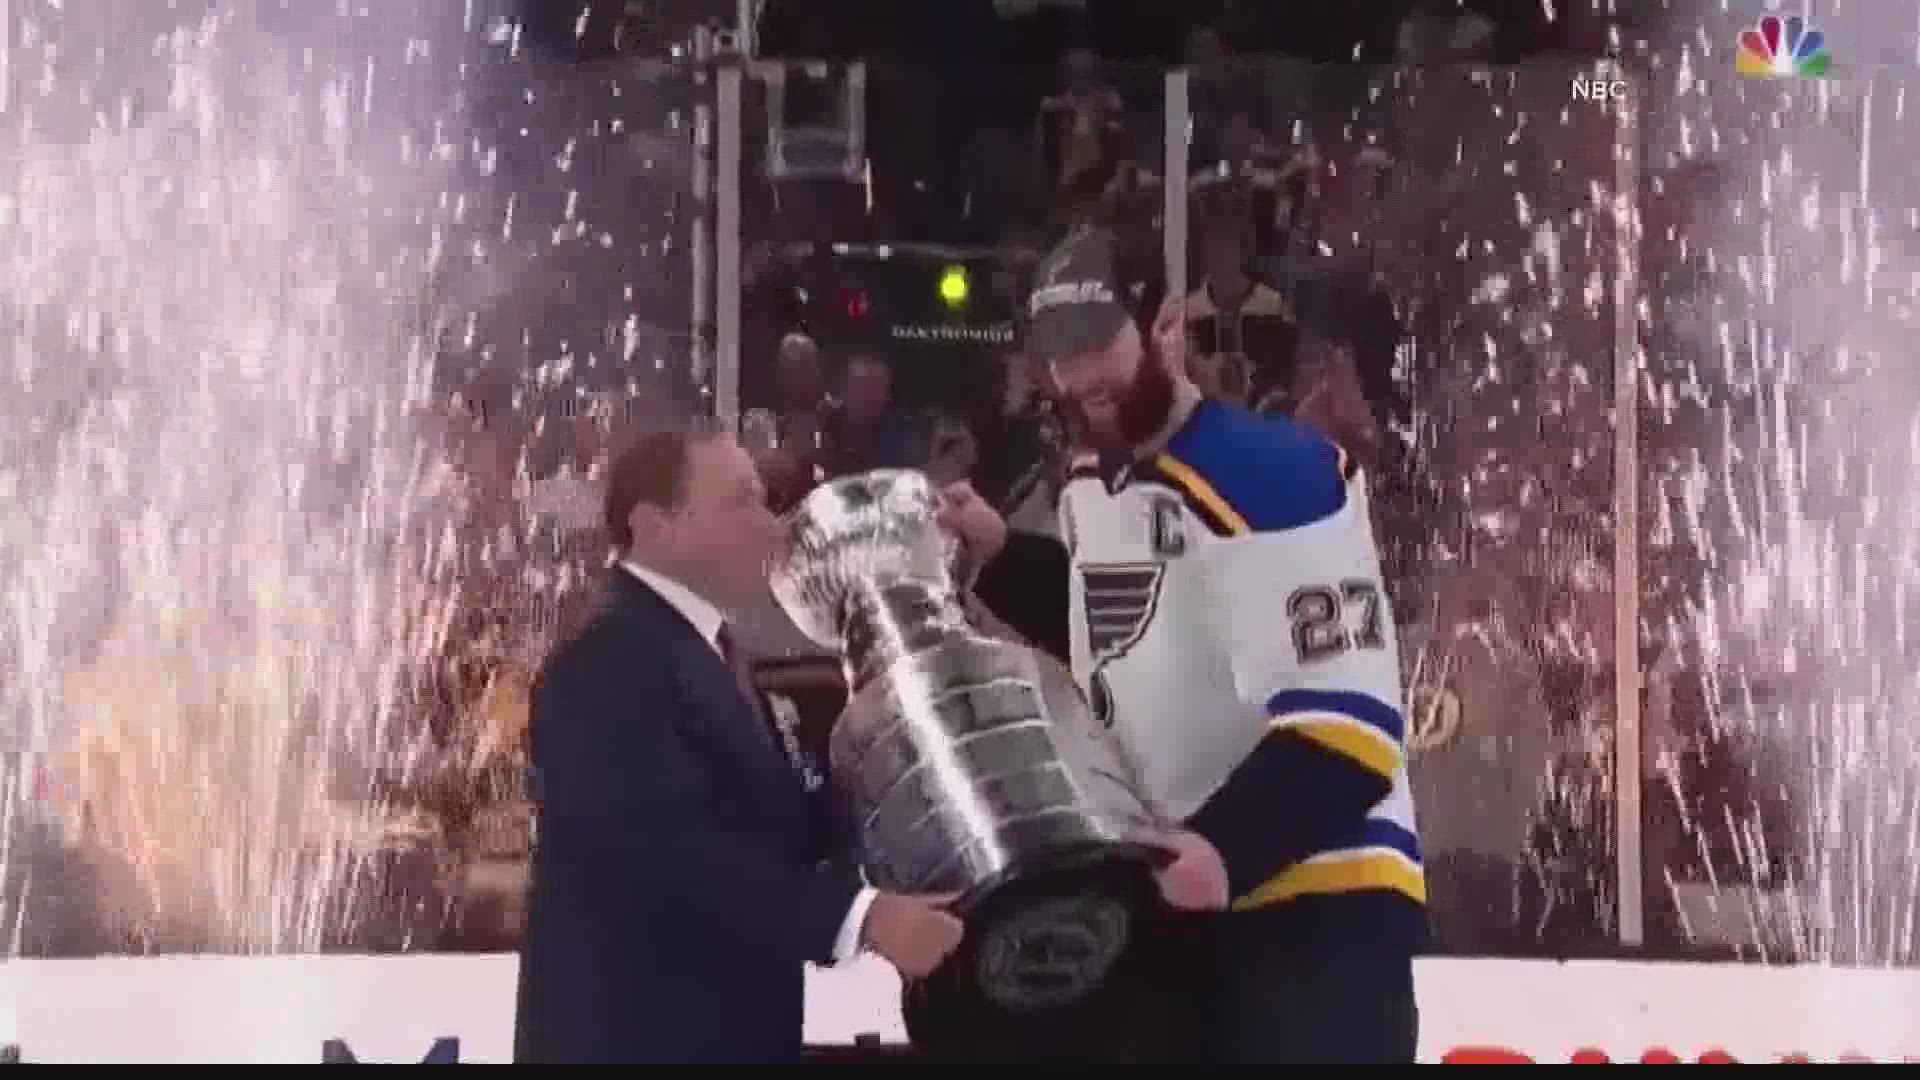 As KSDK marks 75 years, we’re taking a look at some of St. Louis’ biggest stories. In 2019, it didn’t get much better than the Blues and their Stanley Cup journey.